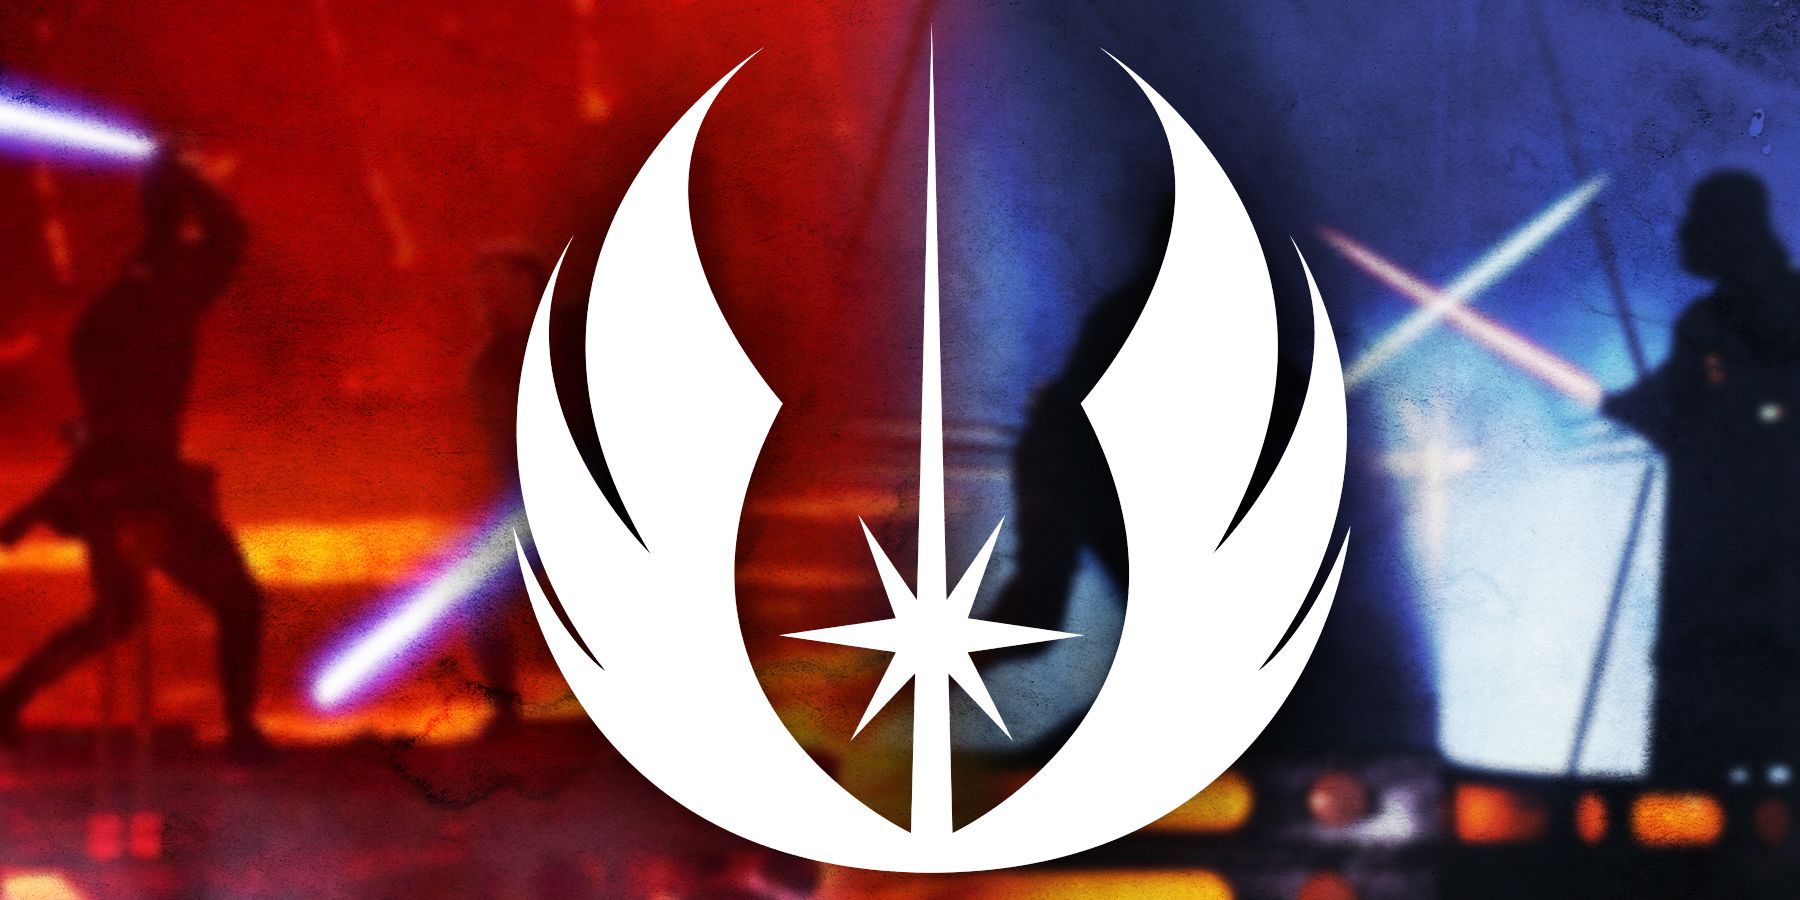 On the left, Obi-Wan Kenobi fights Anakin Skywalker. On the right, Luke Skywalker fights Darth Vader. In the middle, the Jedi Knights symbol is shown. 